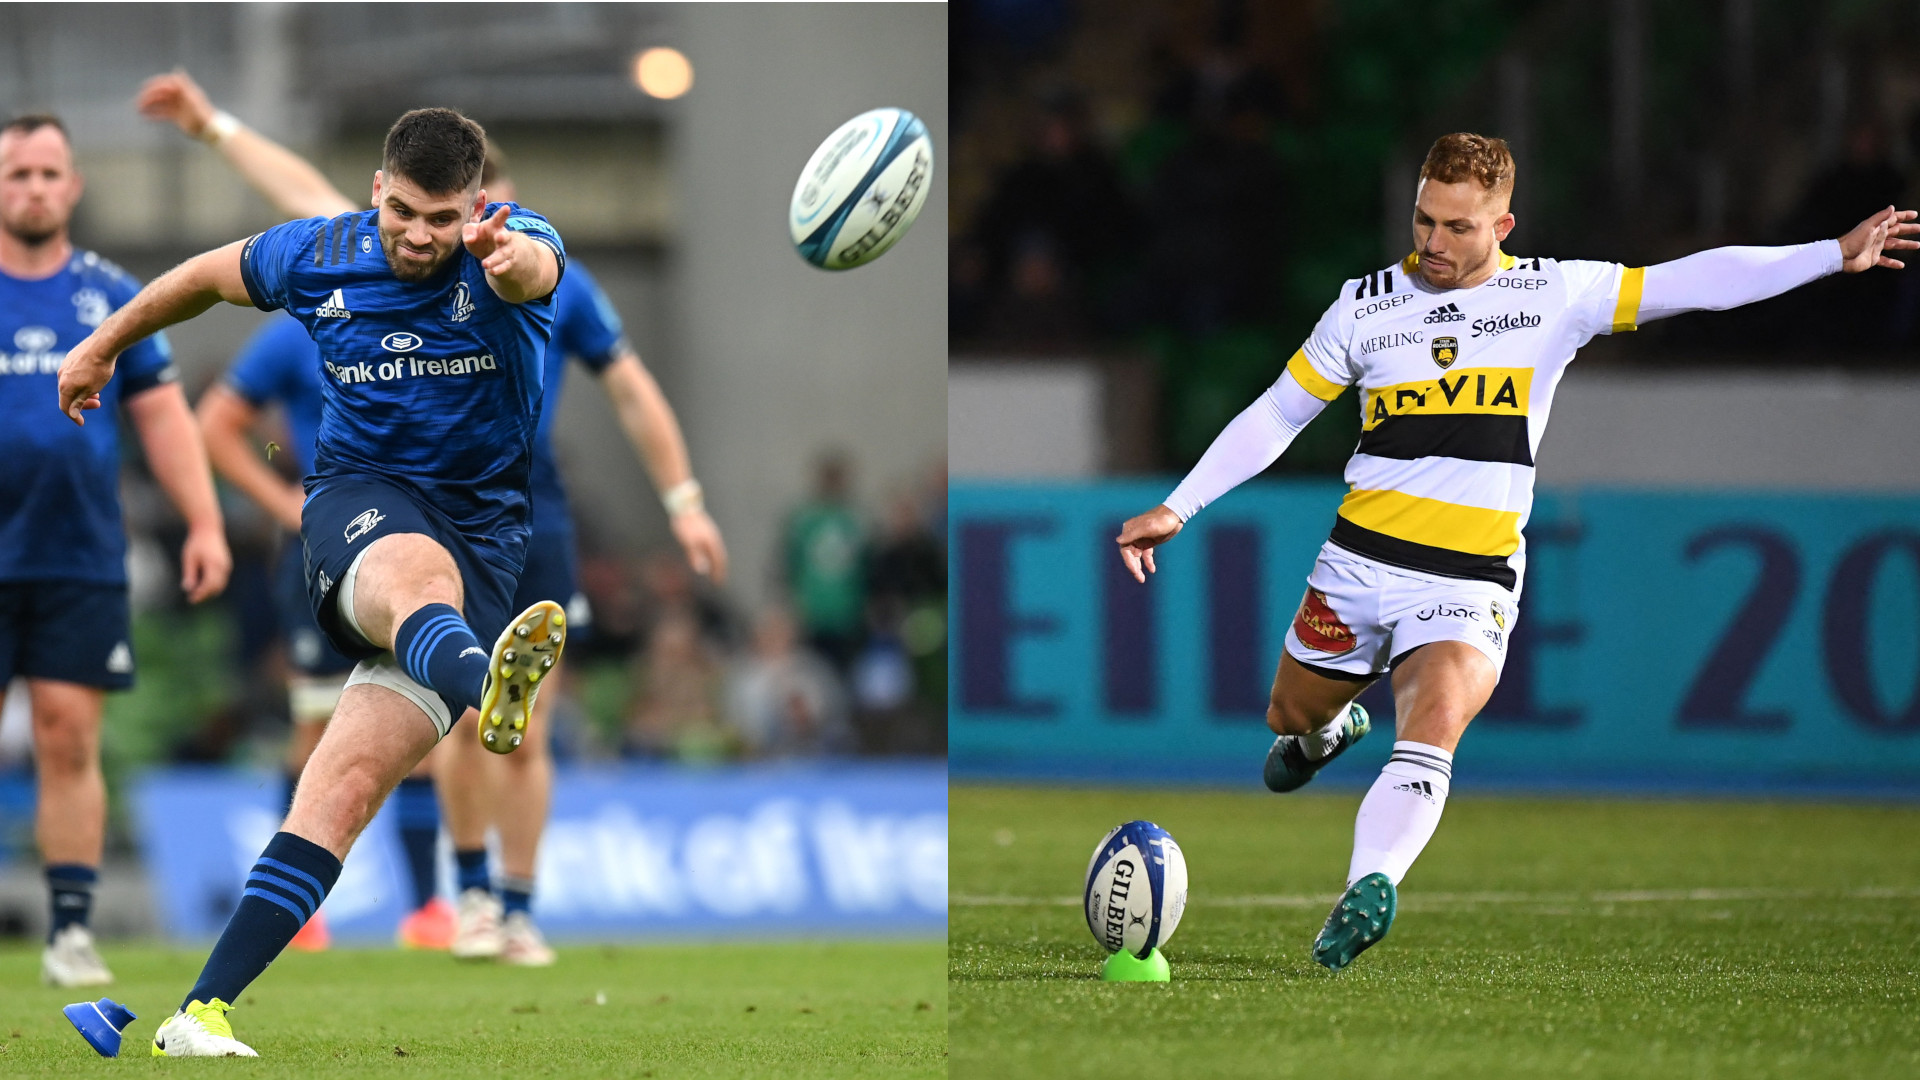 Leinster and La Rochelle rugby players take penalty kicks 